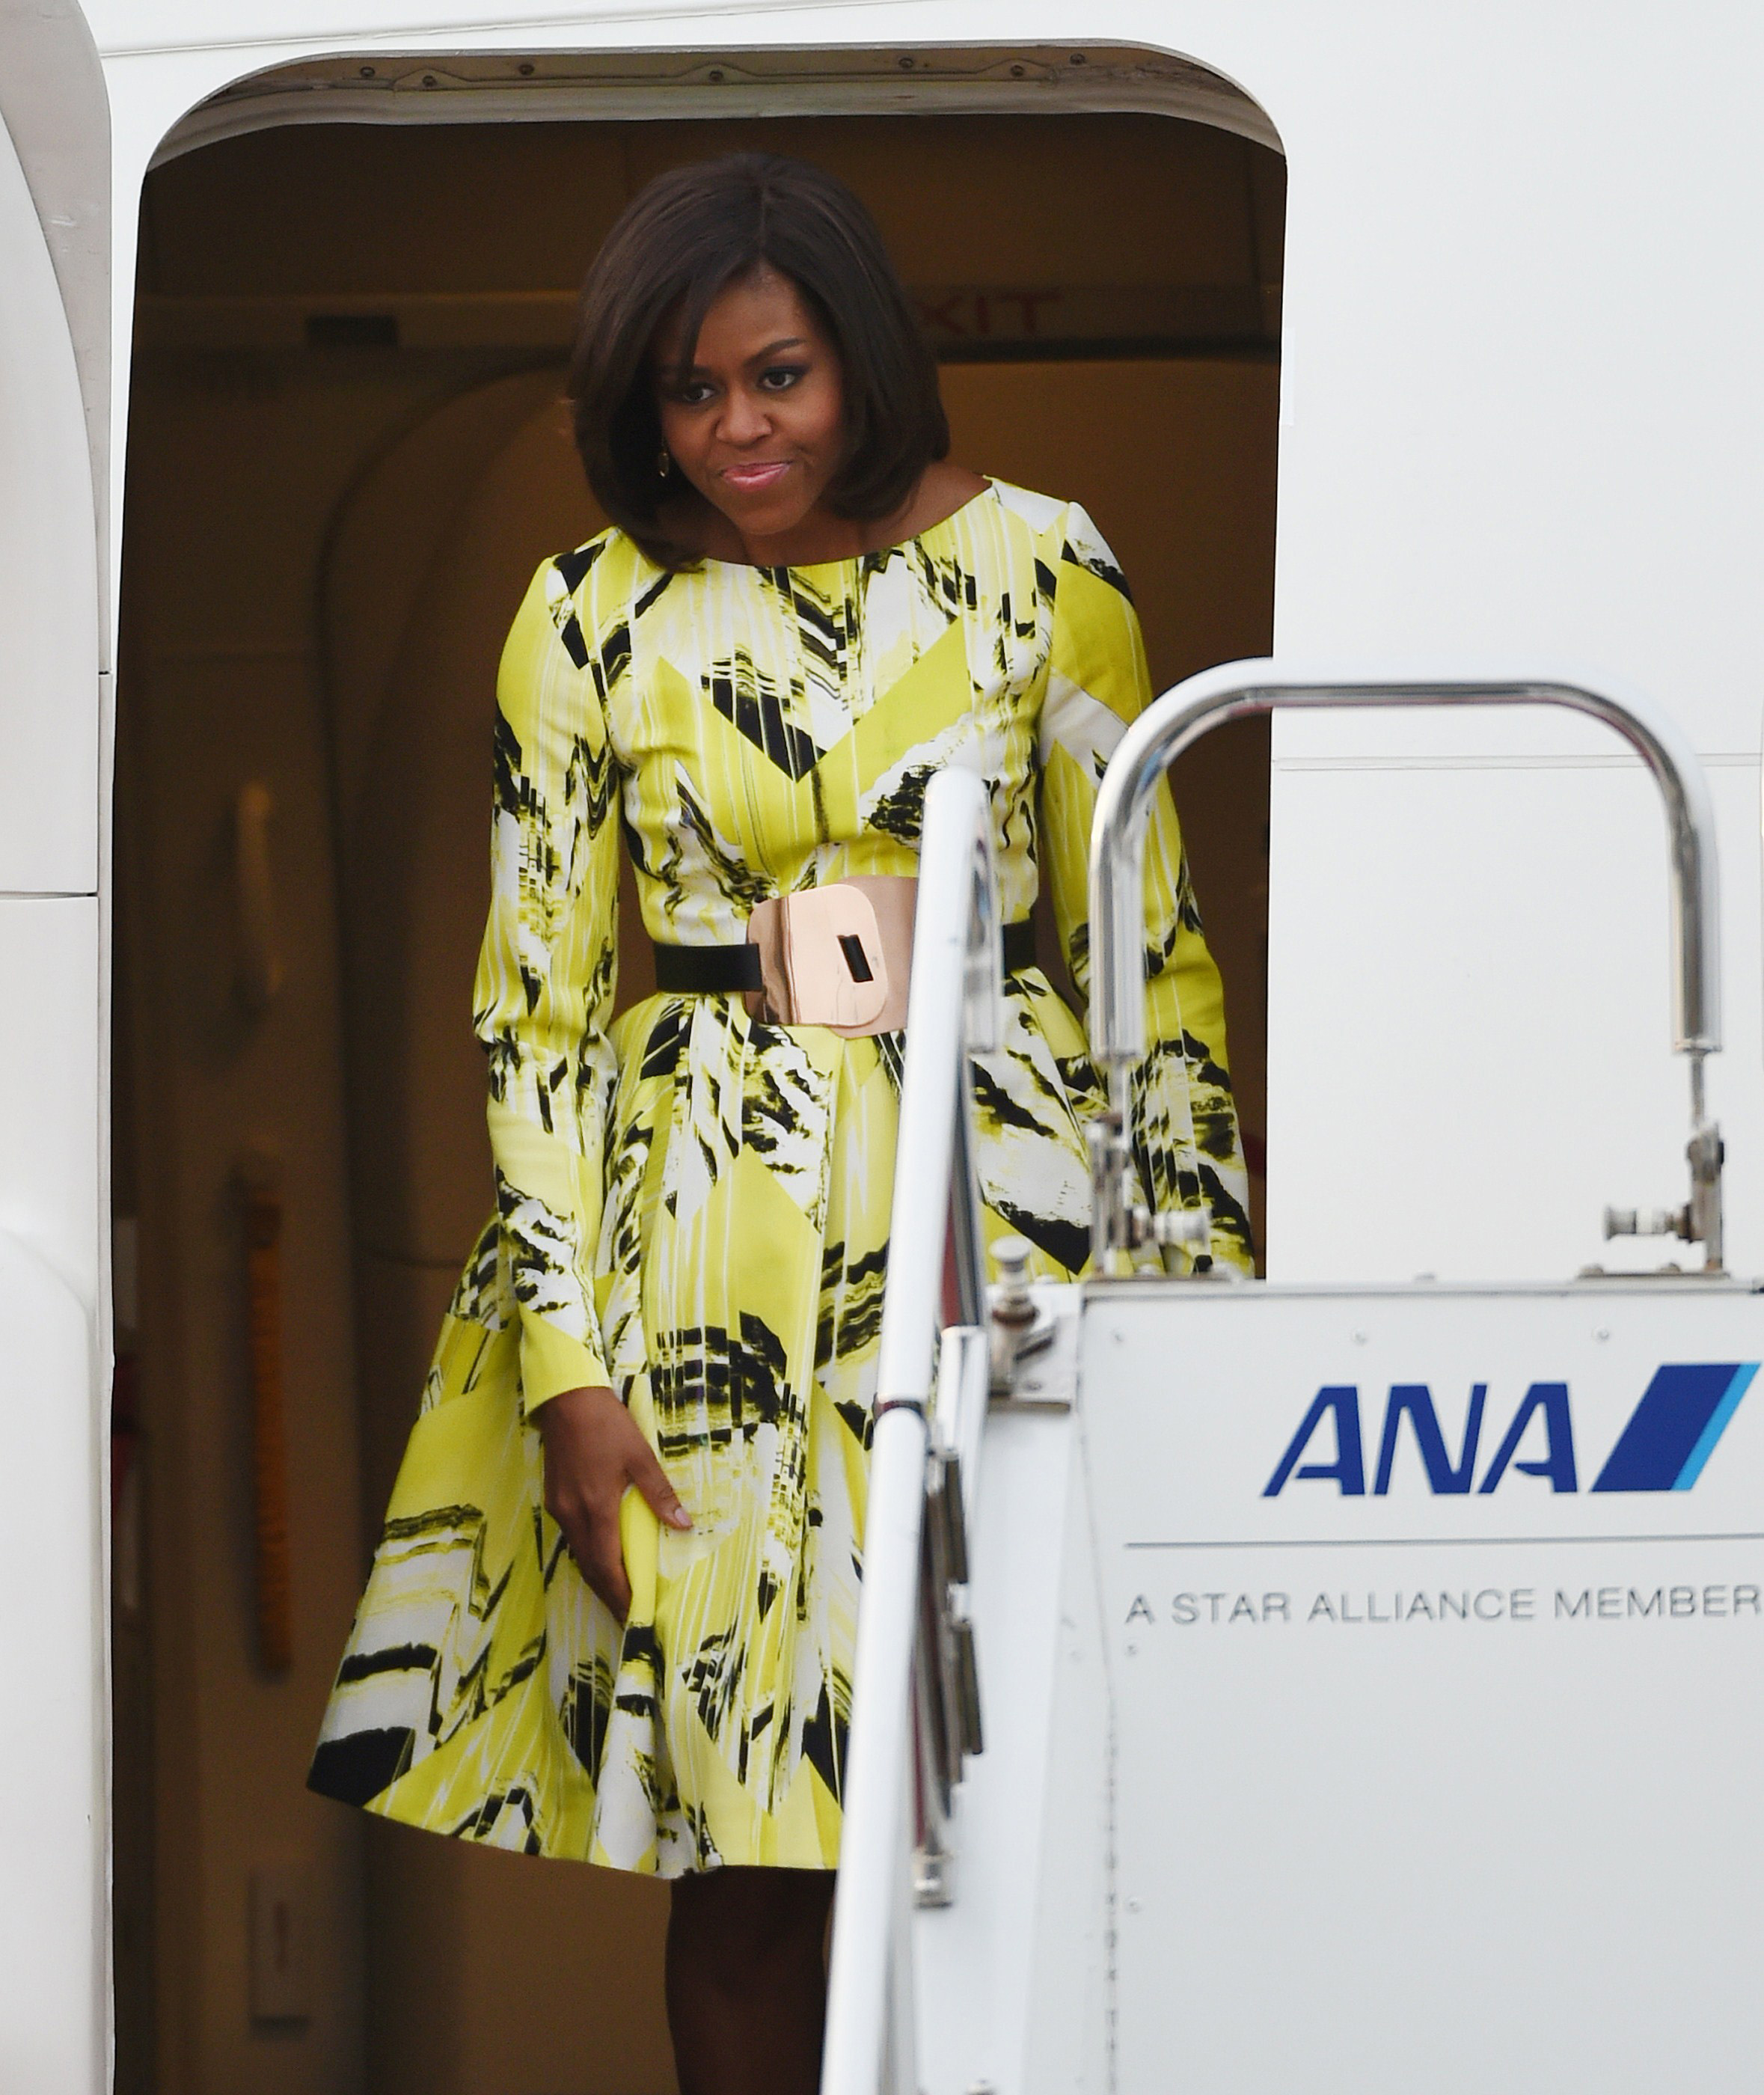 First Lady Michelle Obama exits the plane upon her arrival at Haneda International Airport in Tokyo on March 18, 2015.